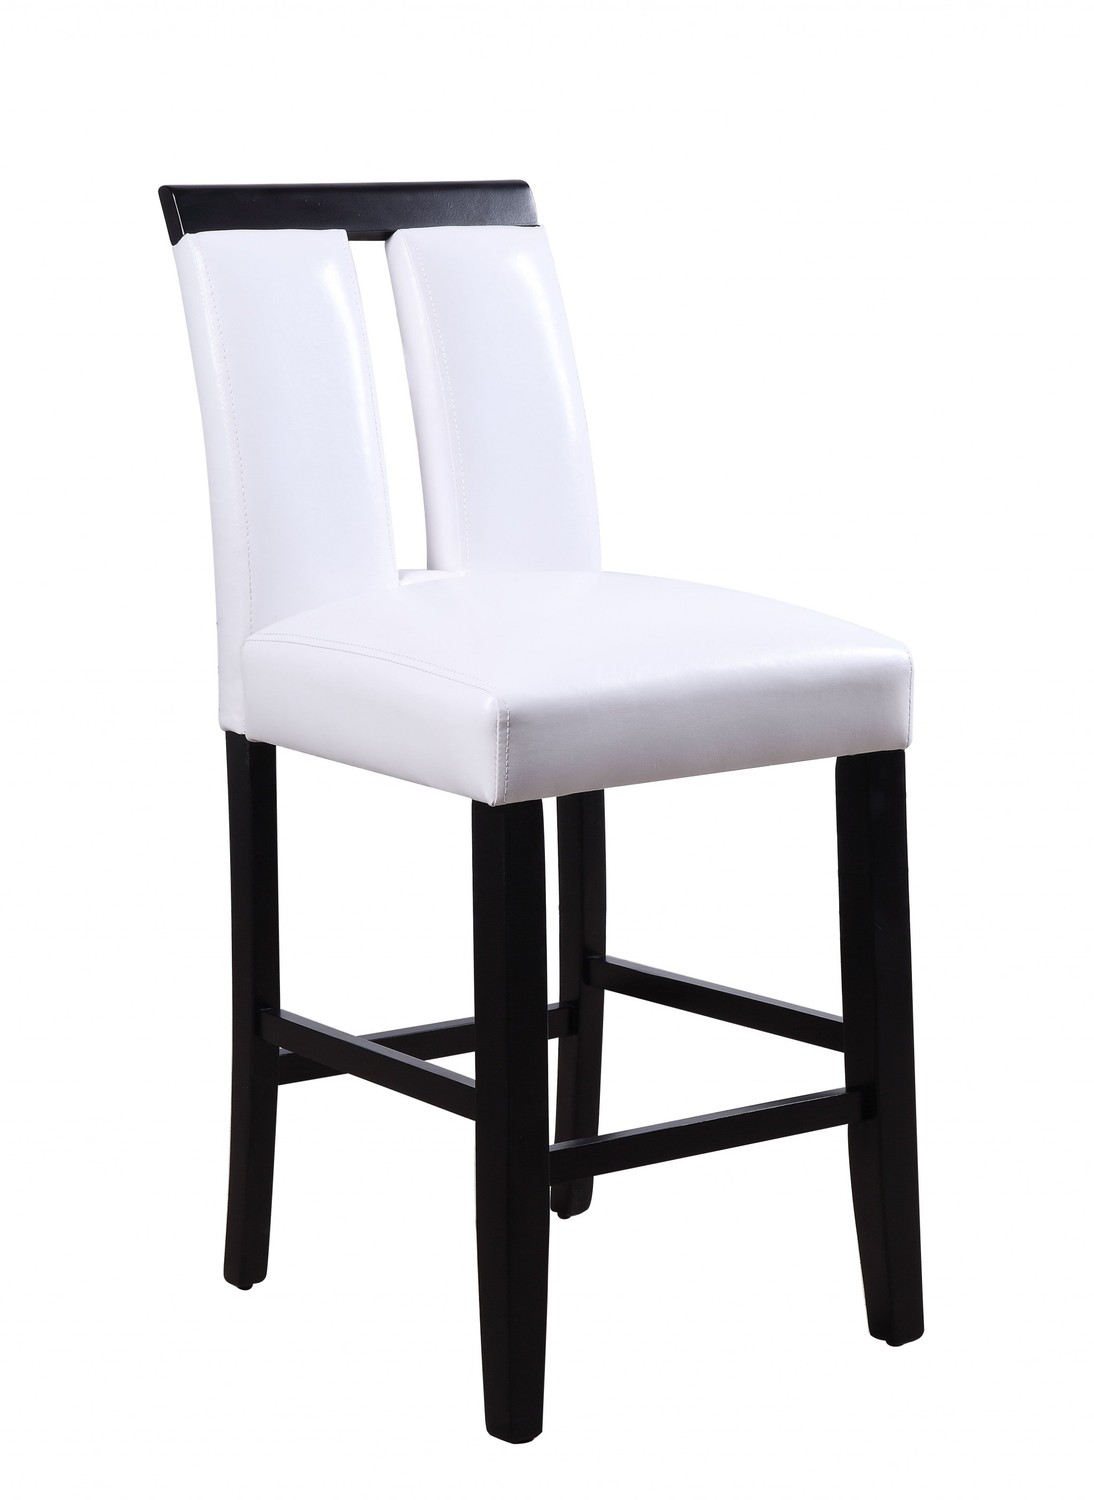 19" X 24" X 41" White Faux Leather Upholstered Seat and Black Wood Counter Height Chair Set of 2